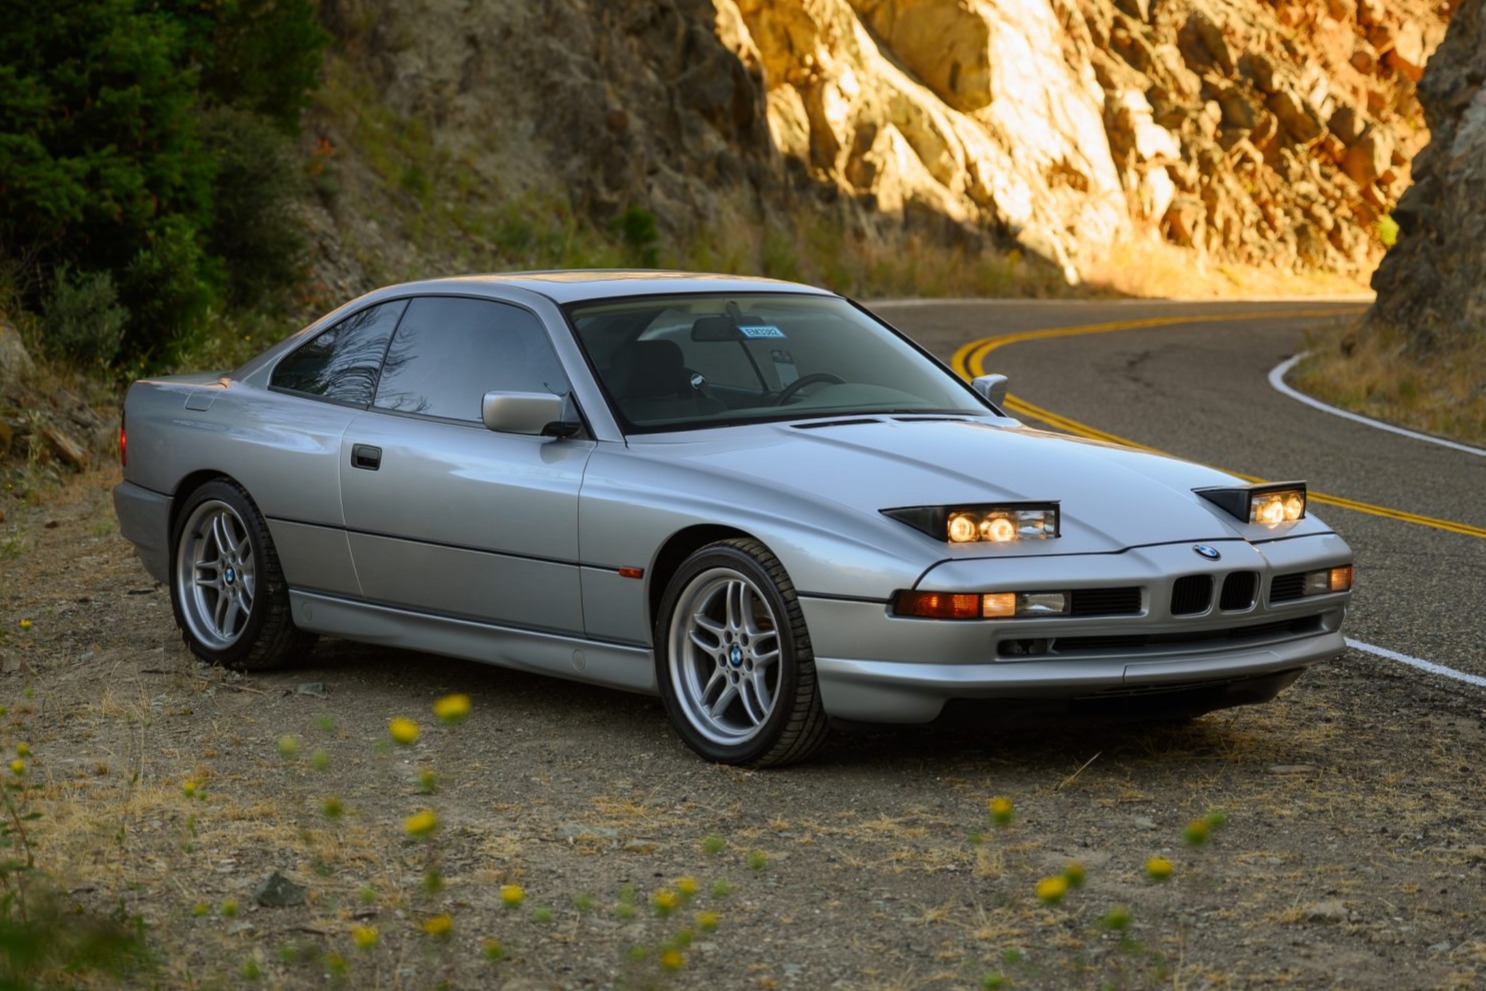 Used 1997 BMW 840Ci Review